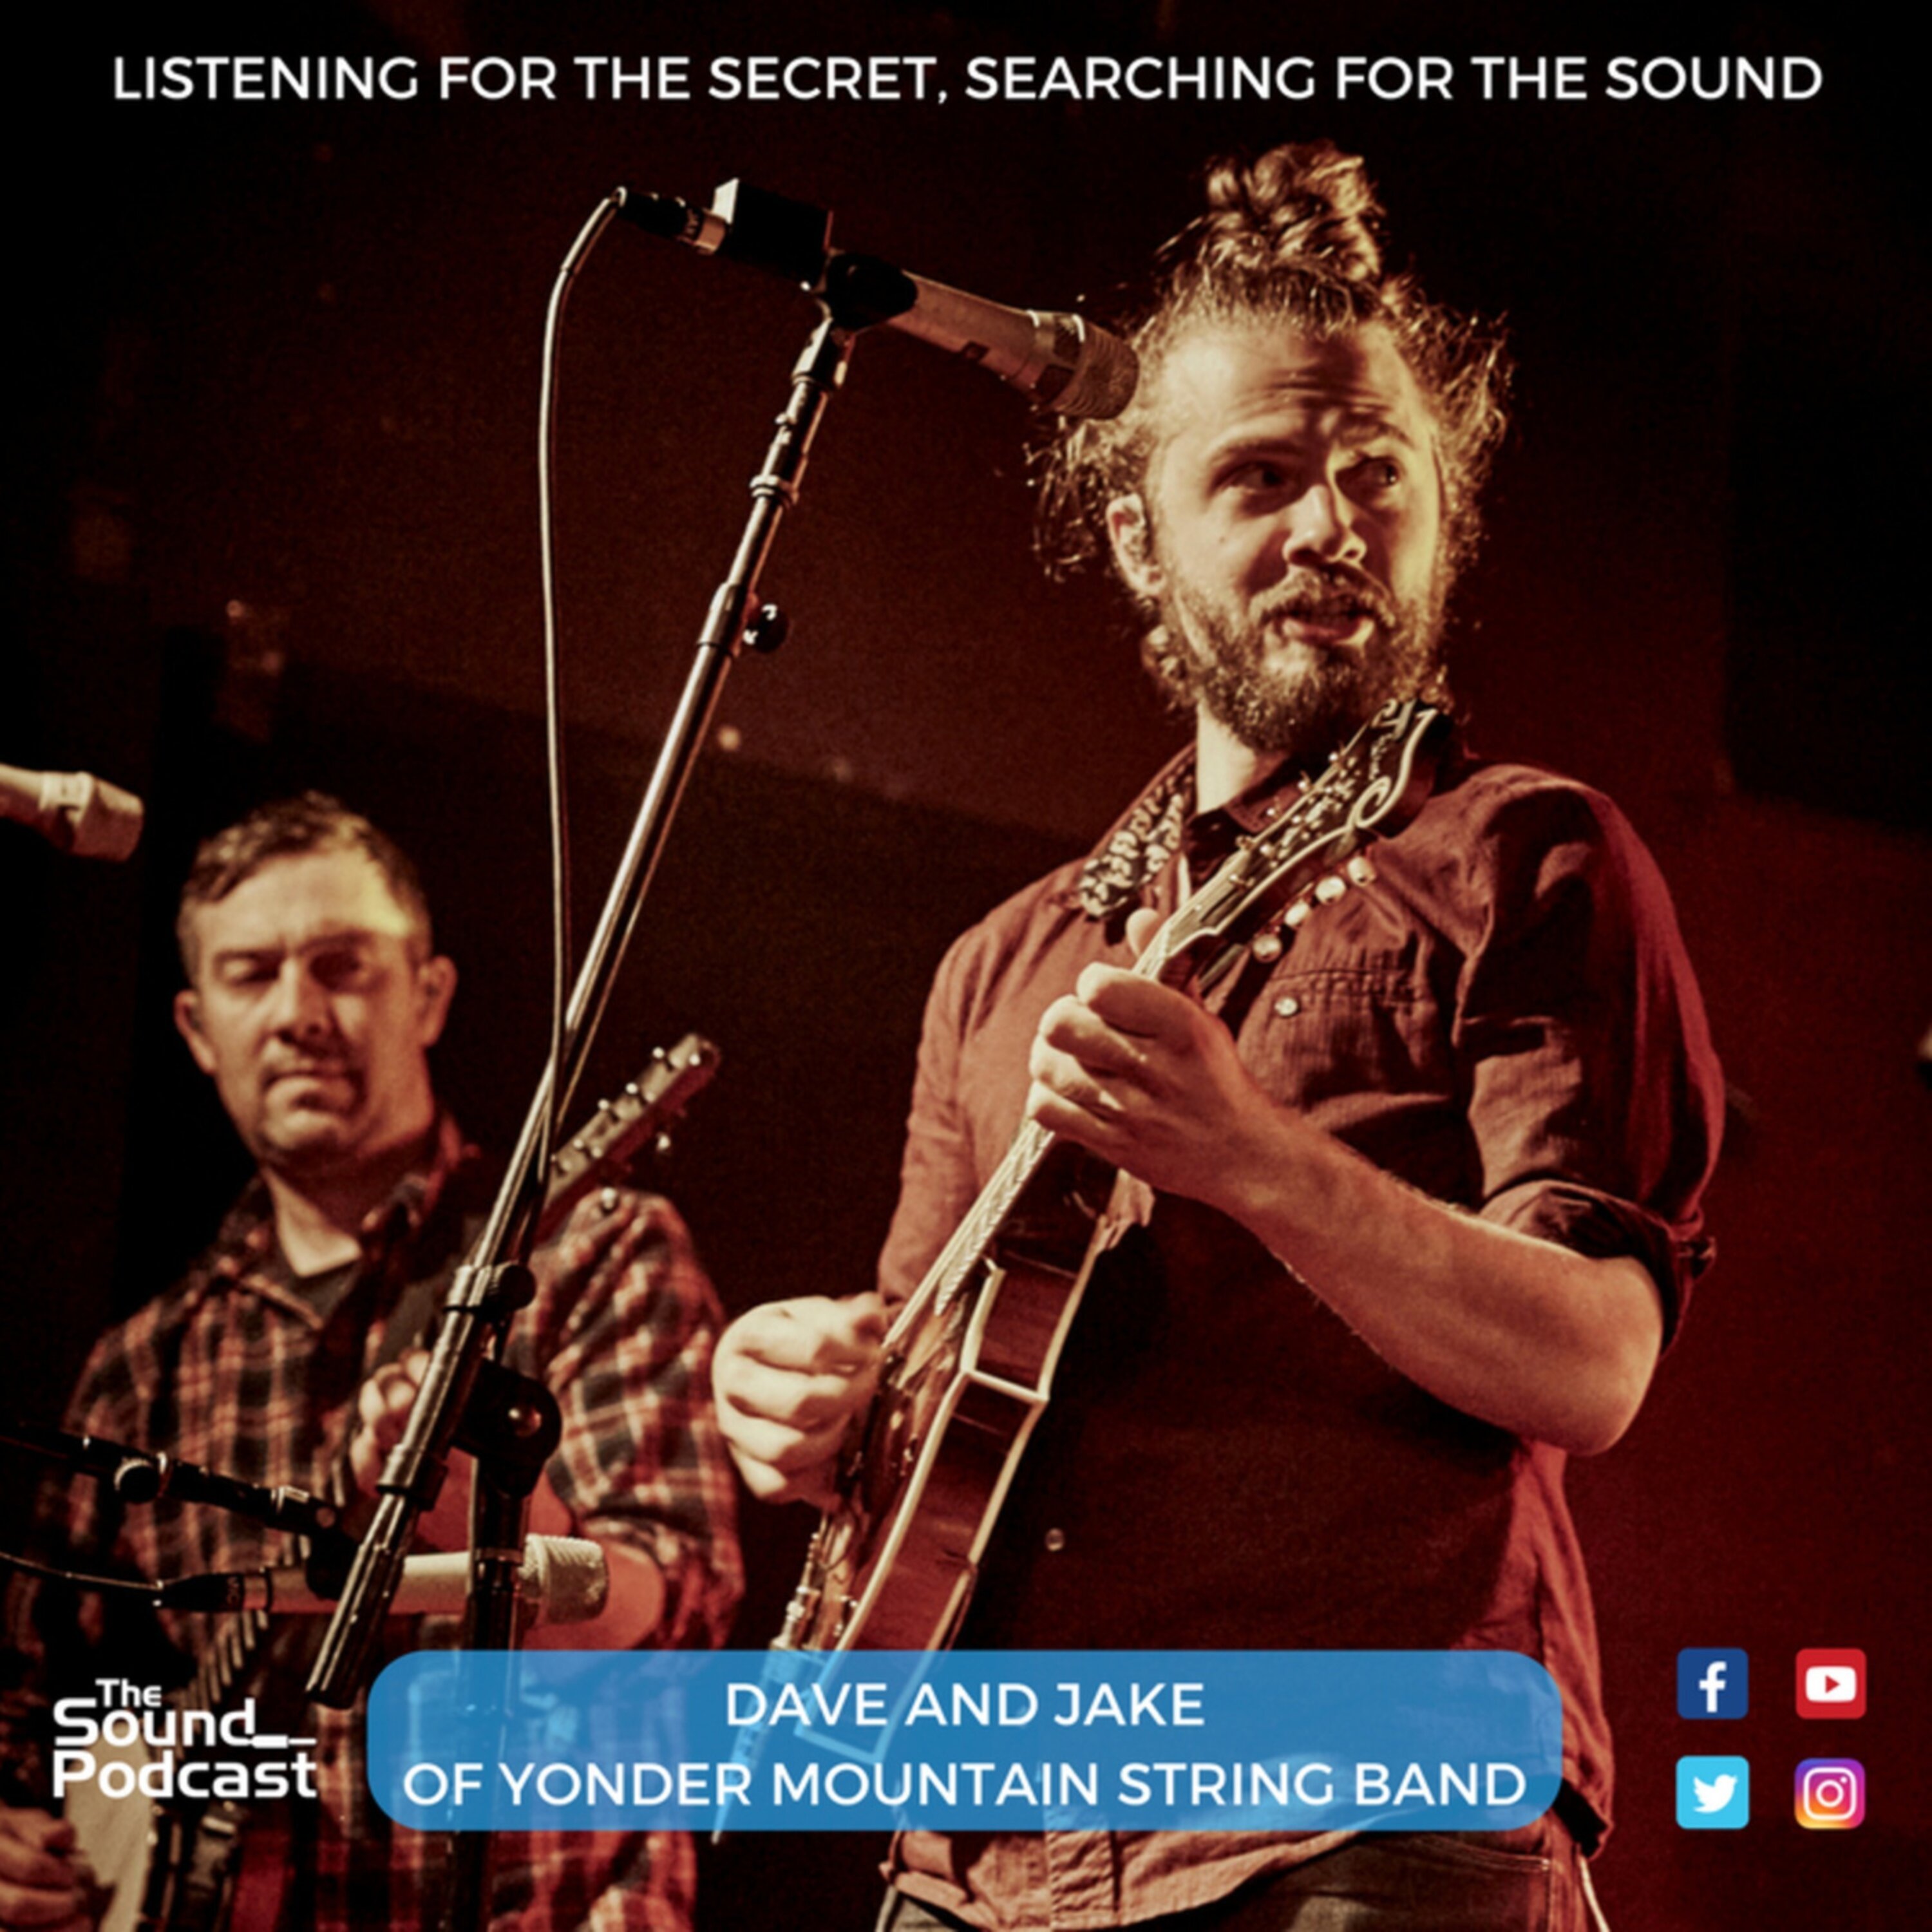 Episode 59: Dave and Jake of Yonder Mountain String Band Image